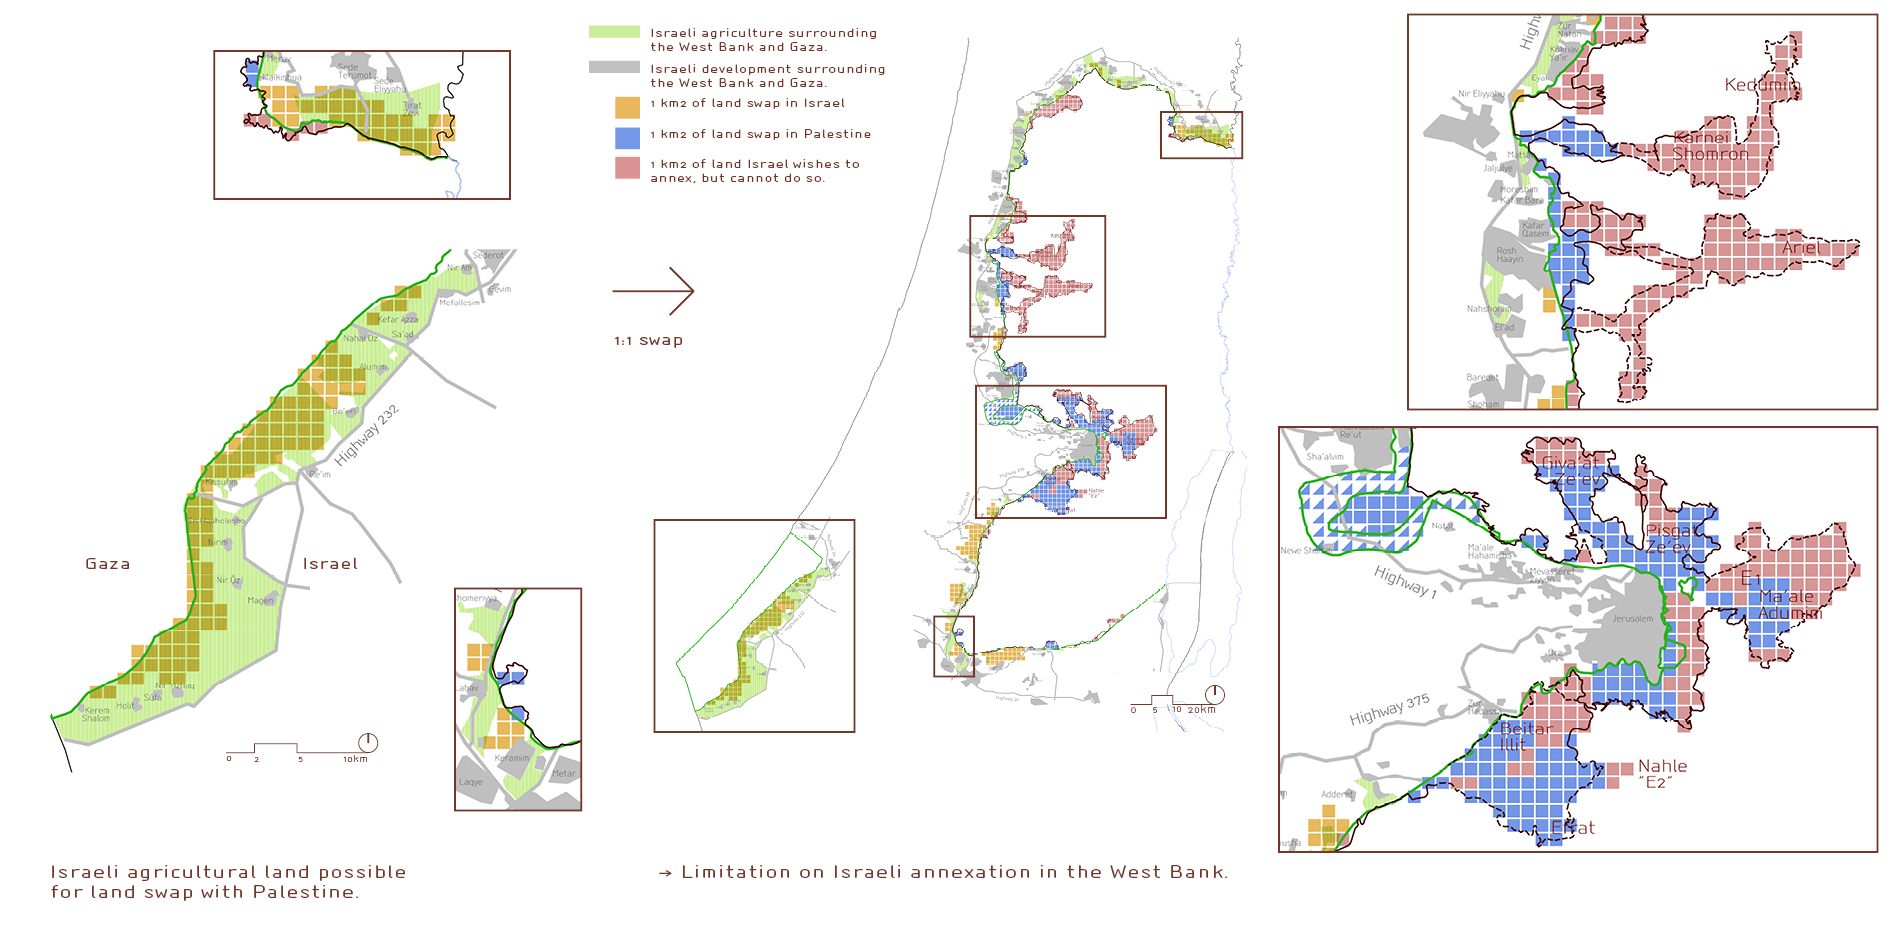 4.2. The landscape of land swaps  - limits of open spaces effect on possible border.